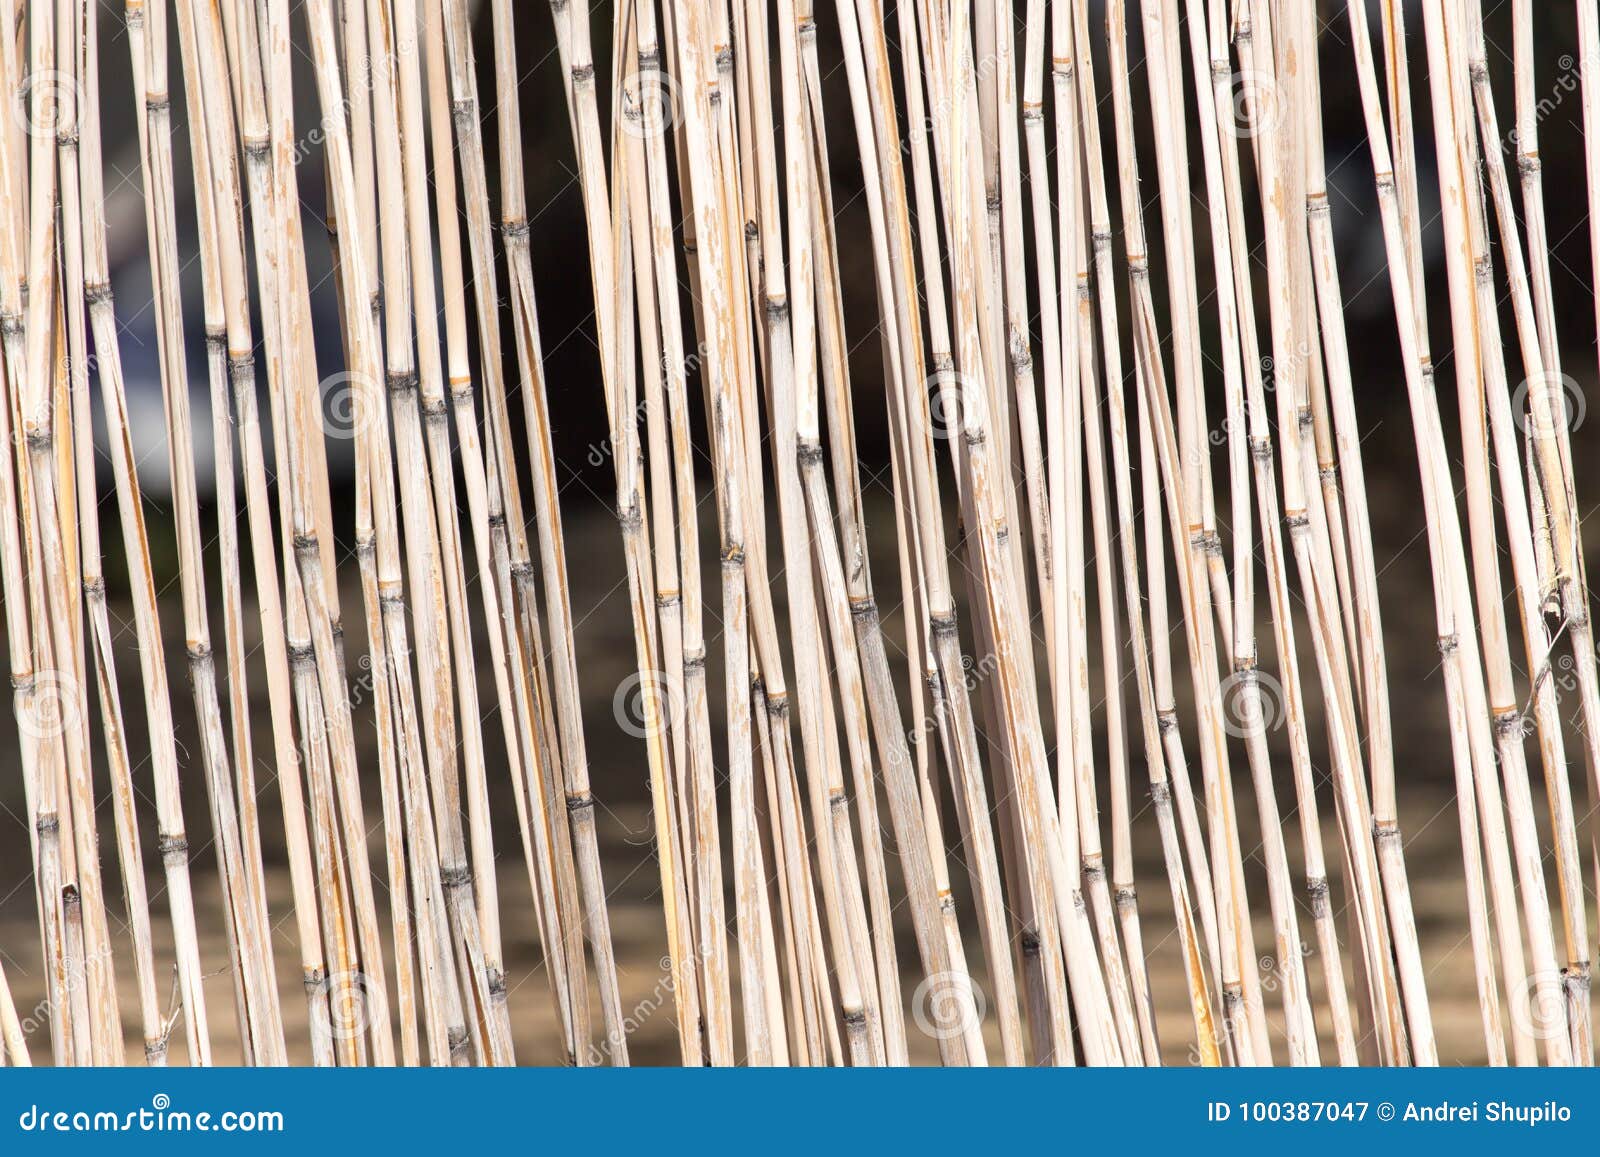  Japanese Bamboo Texture  Good For Background Stock Image 